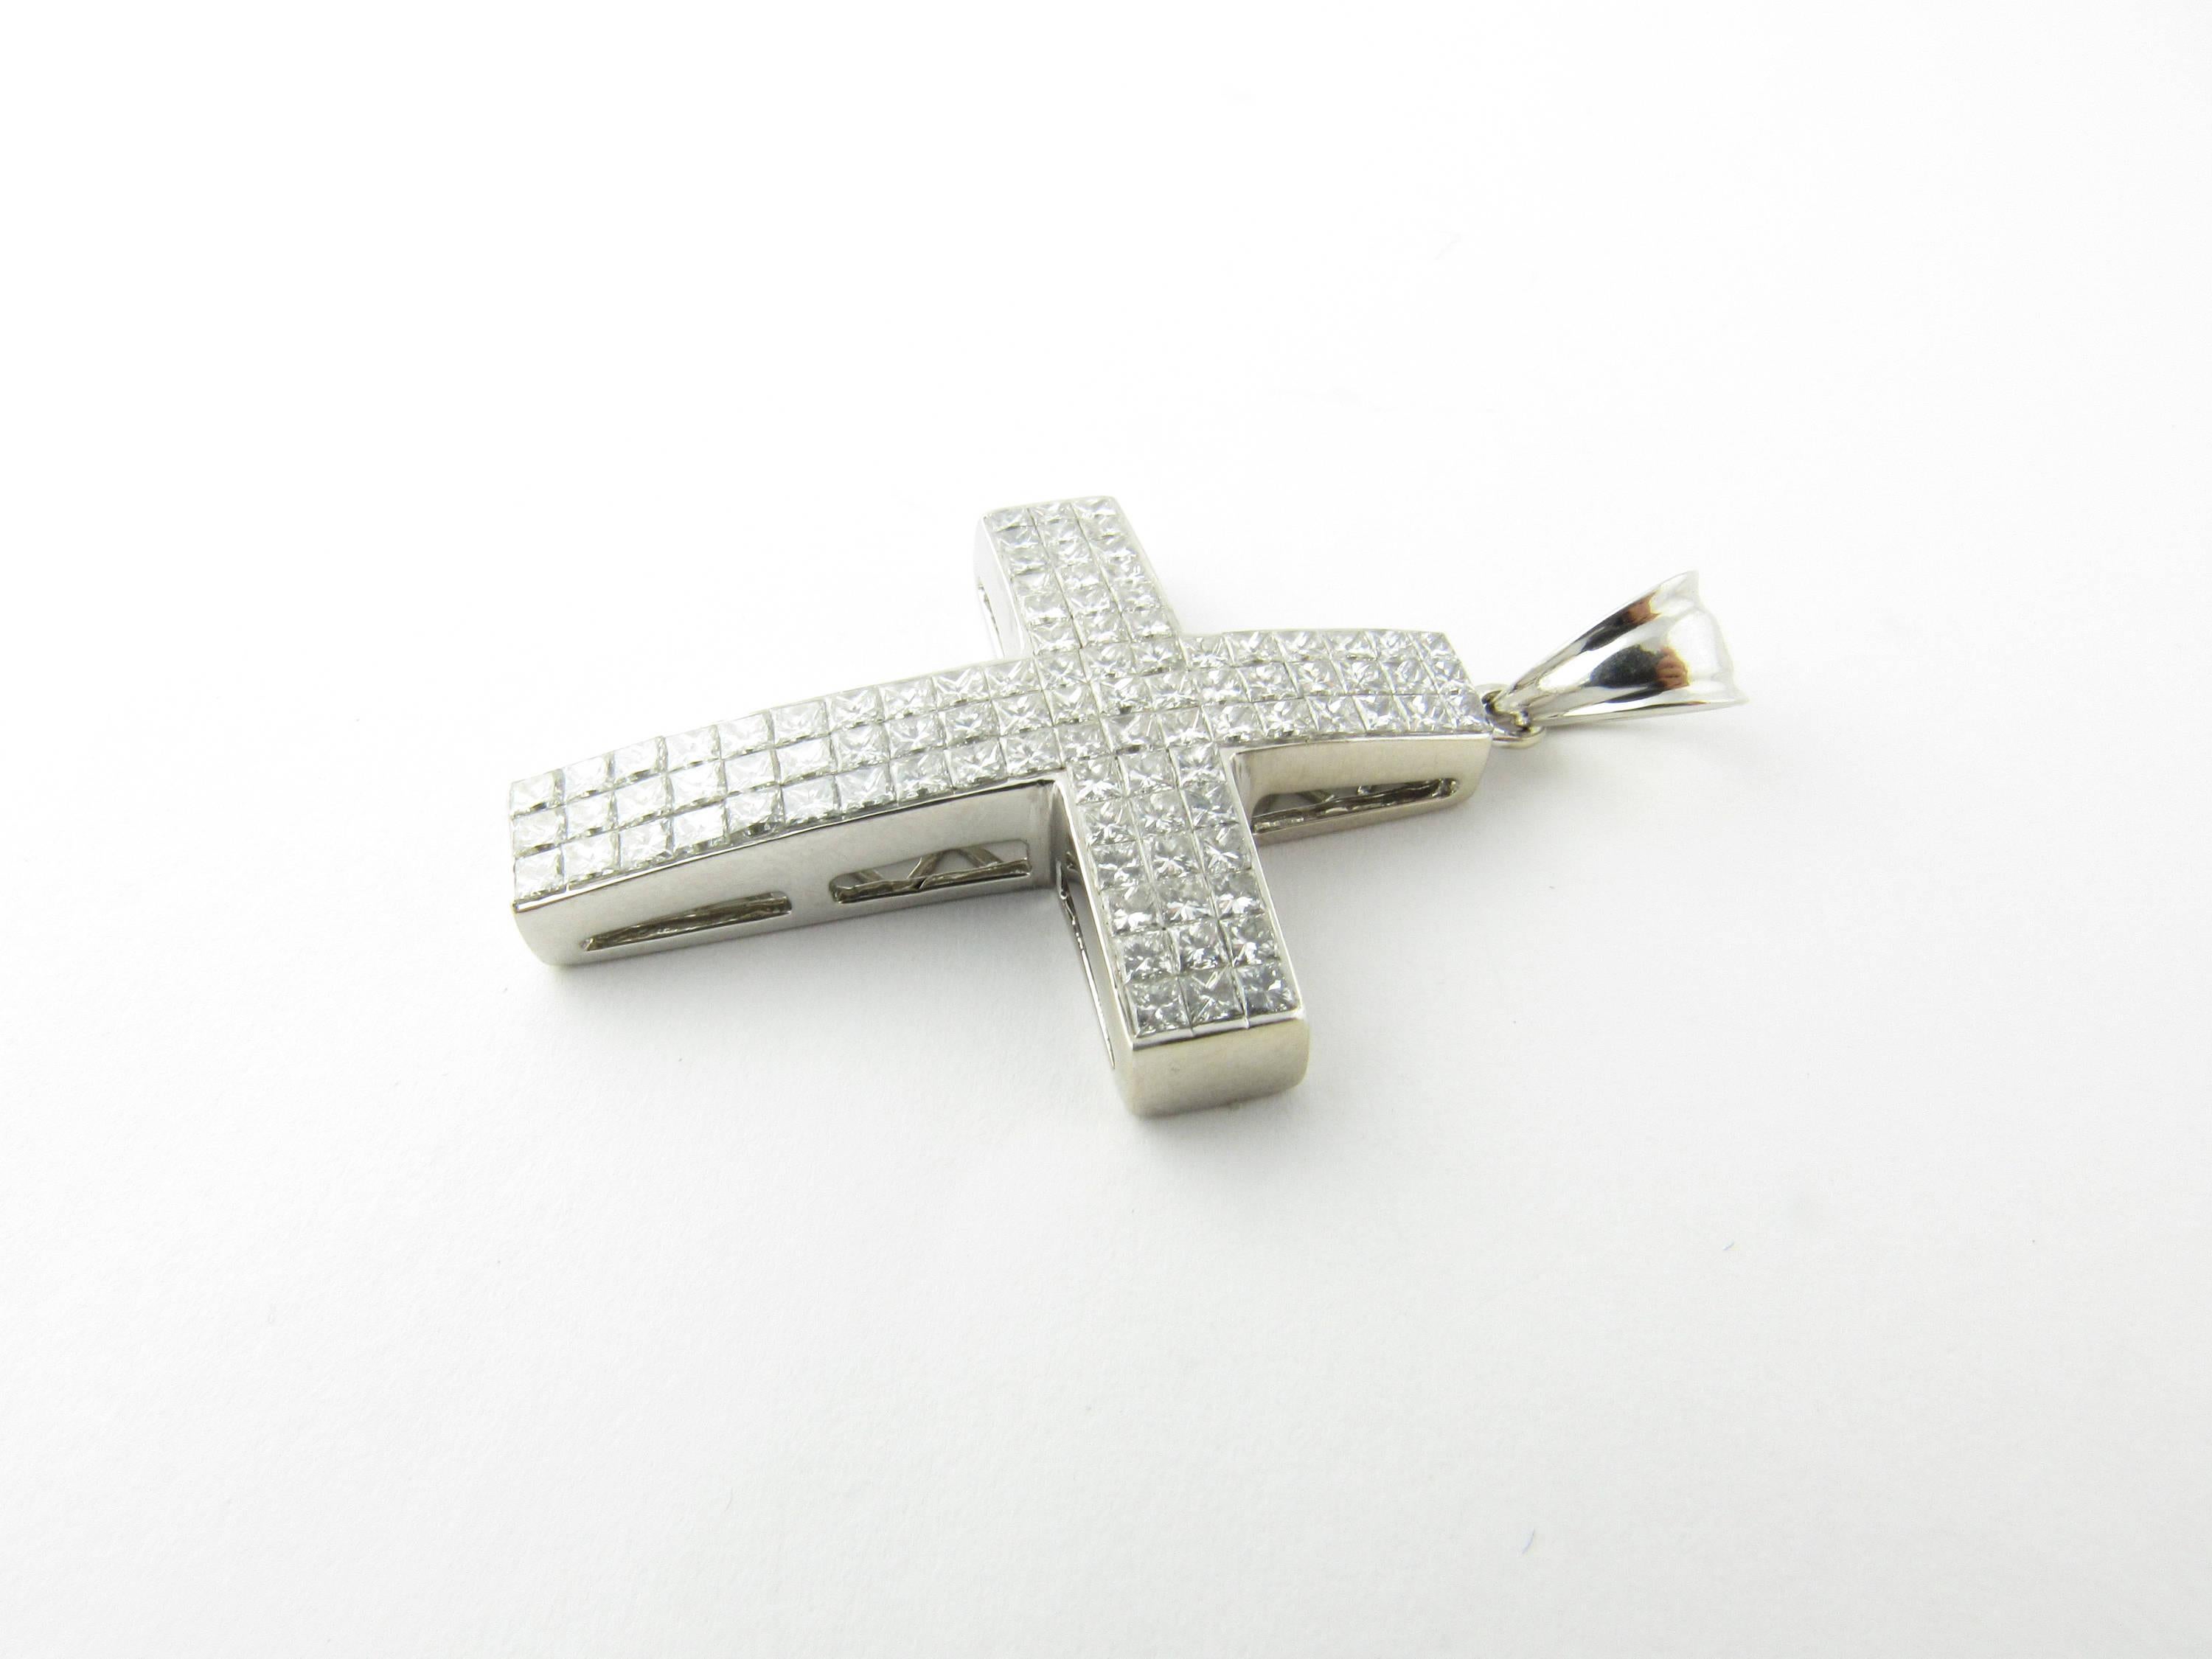 Vintage 14 Karat White Gold Princess Diamond Cross Pendant-

This spectacular cross pendant is crafted with 93 princess cut diamonds set in classic 14K white gold.

Approximate total diamond weight: 3 cts.

Diamond color: H

Diamond clarity: